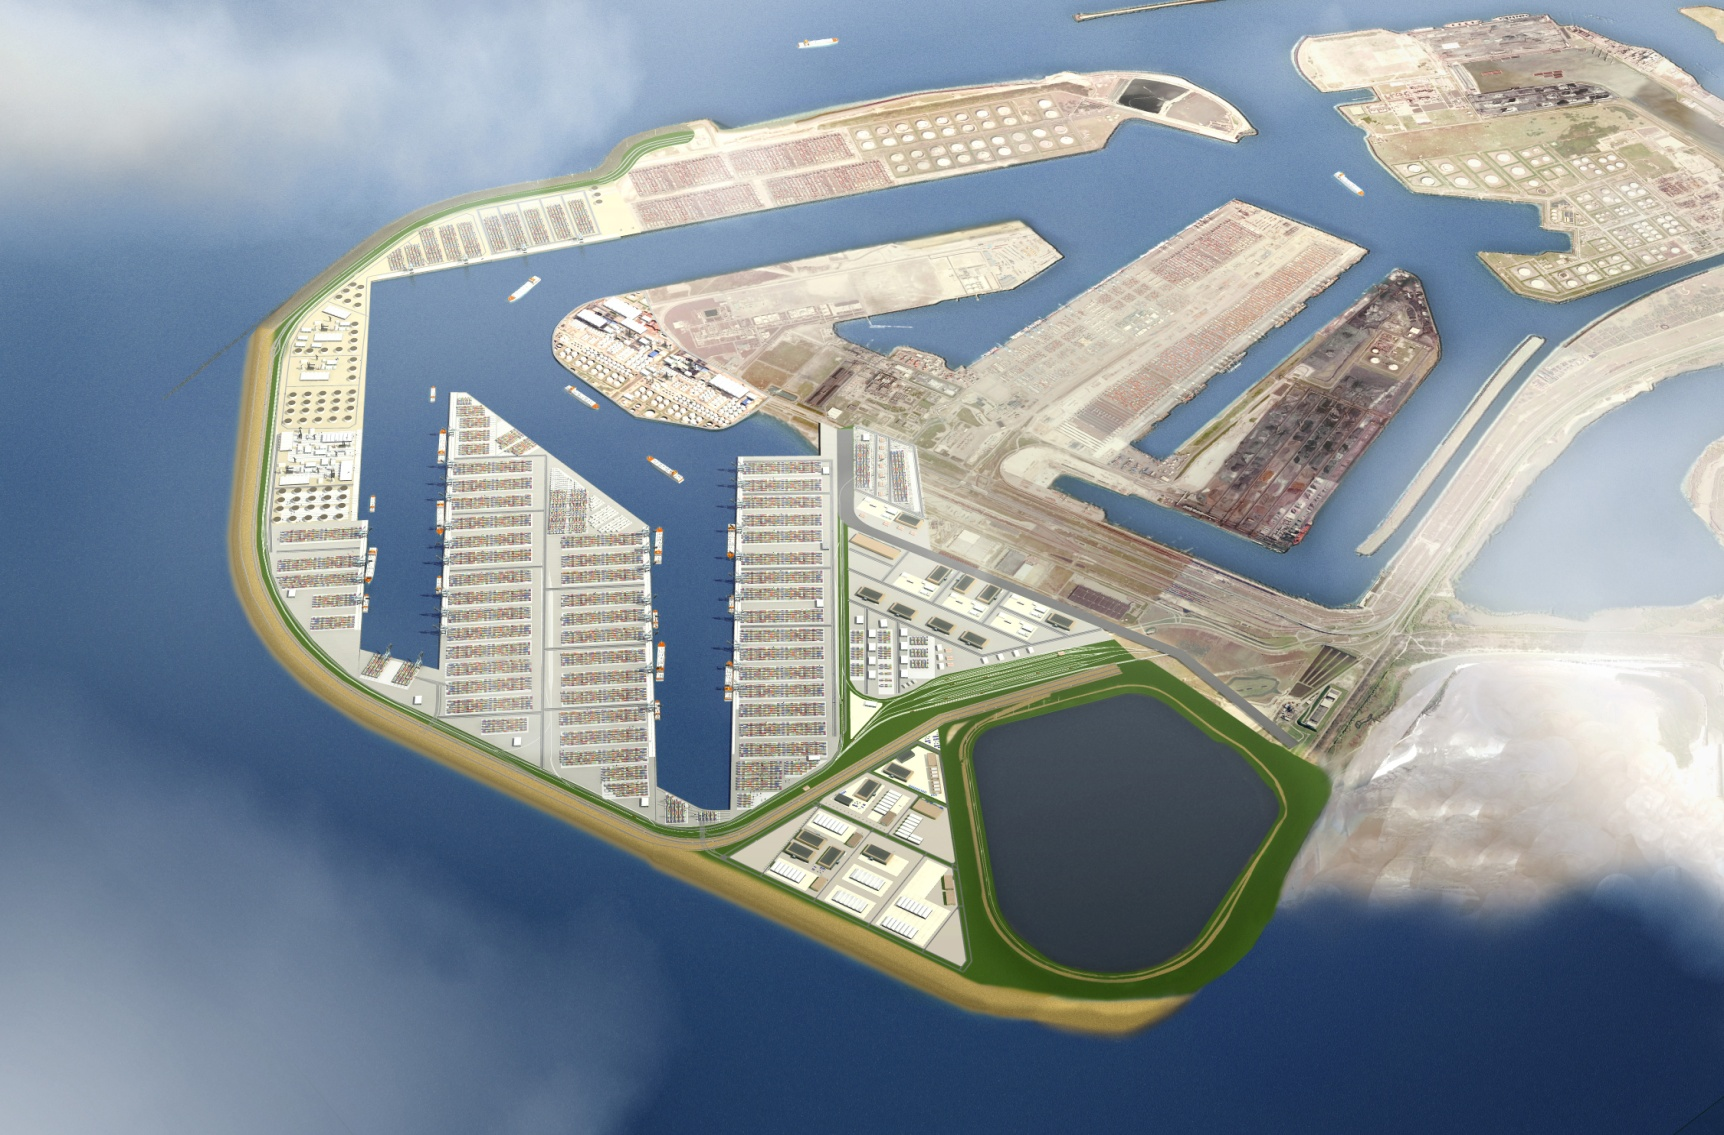 Therefore: Construction of Maasvlakte 2 is needed The construction of Maasvlakte 2